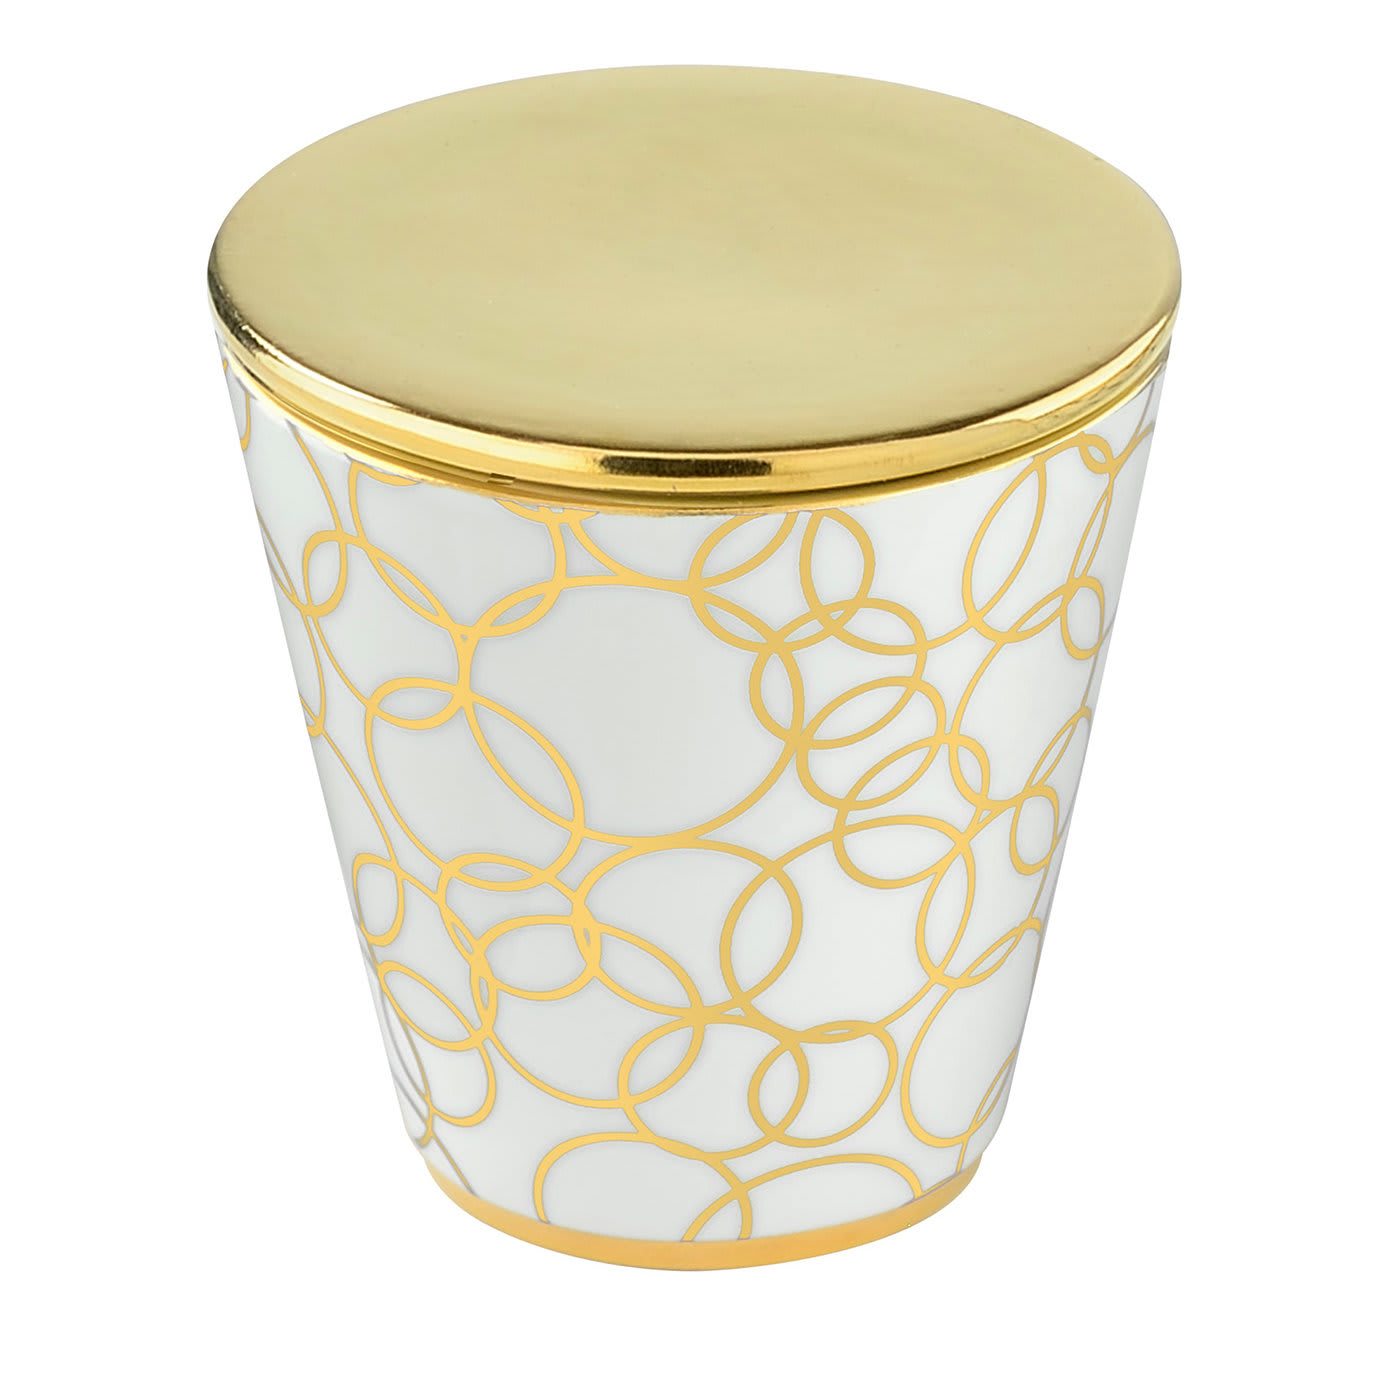 Bolly Gold Candle - Le Porcellane